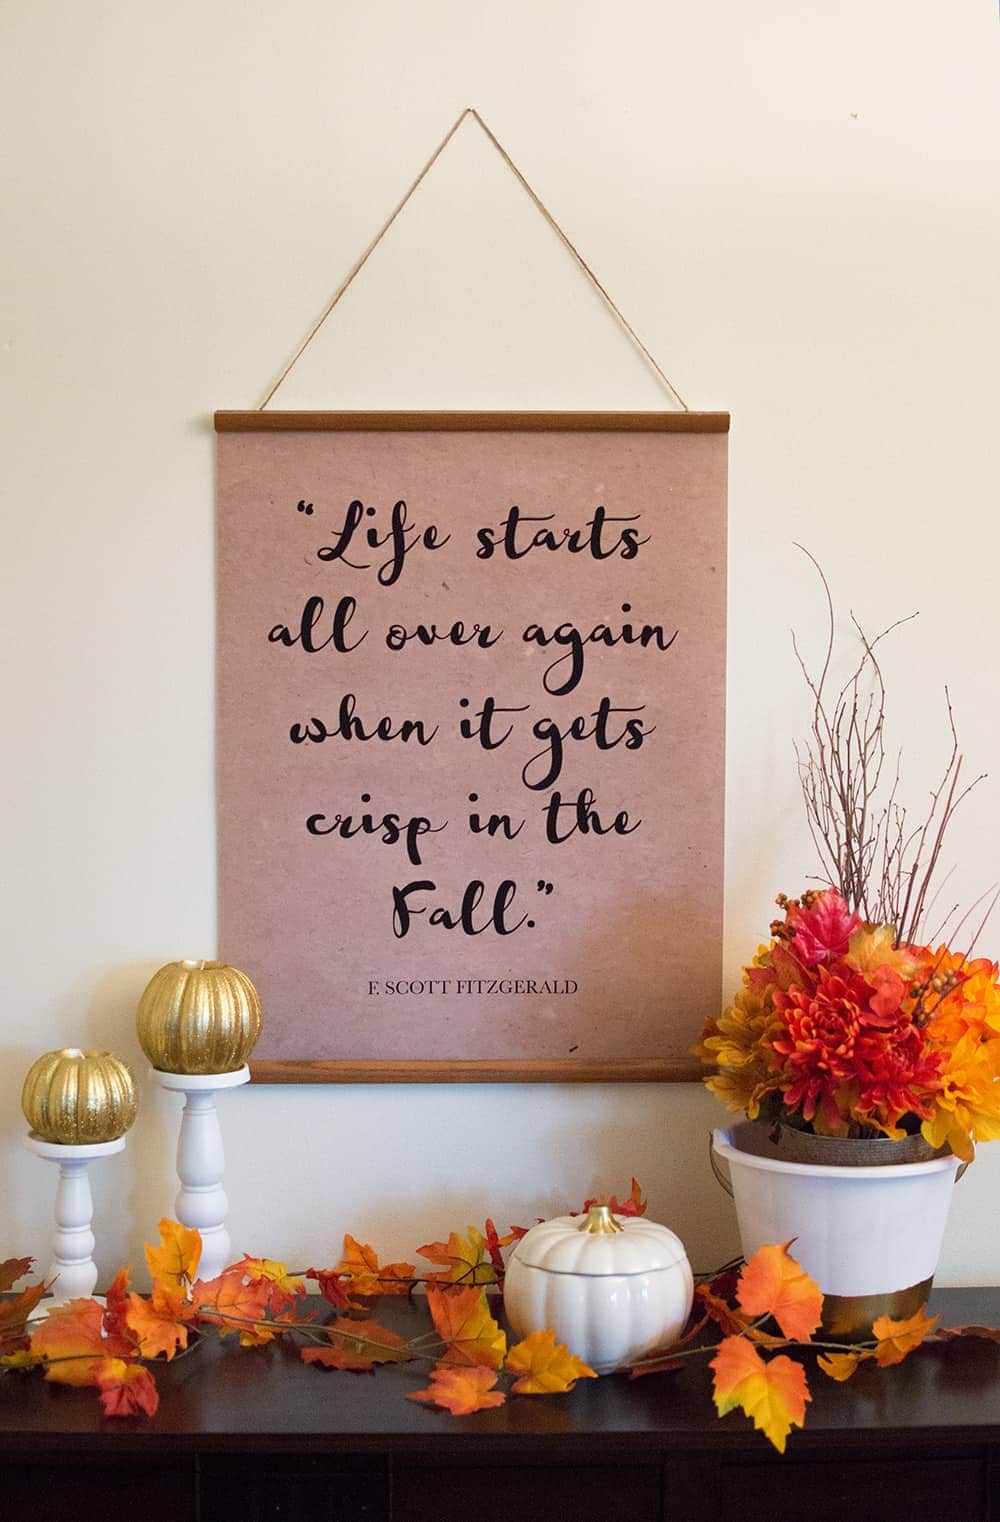 DIY Fall Quote Banners